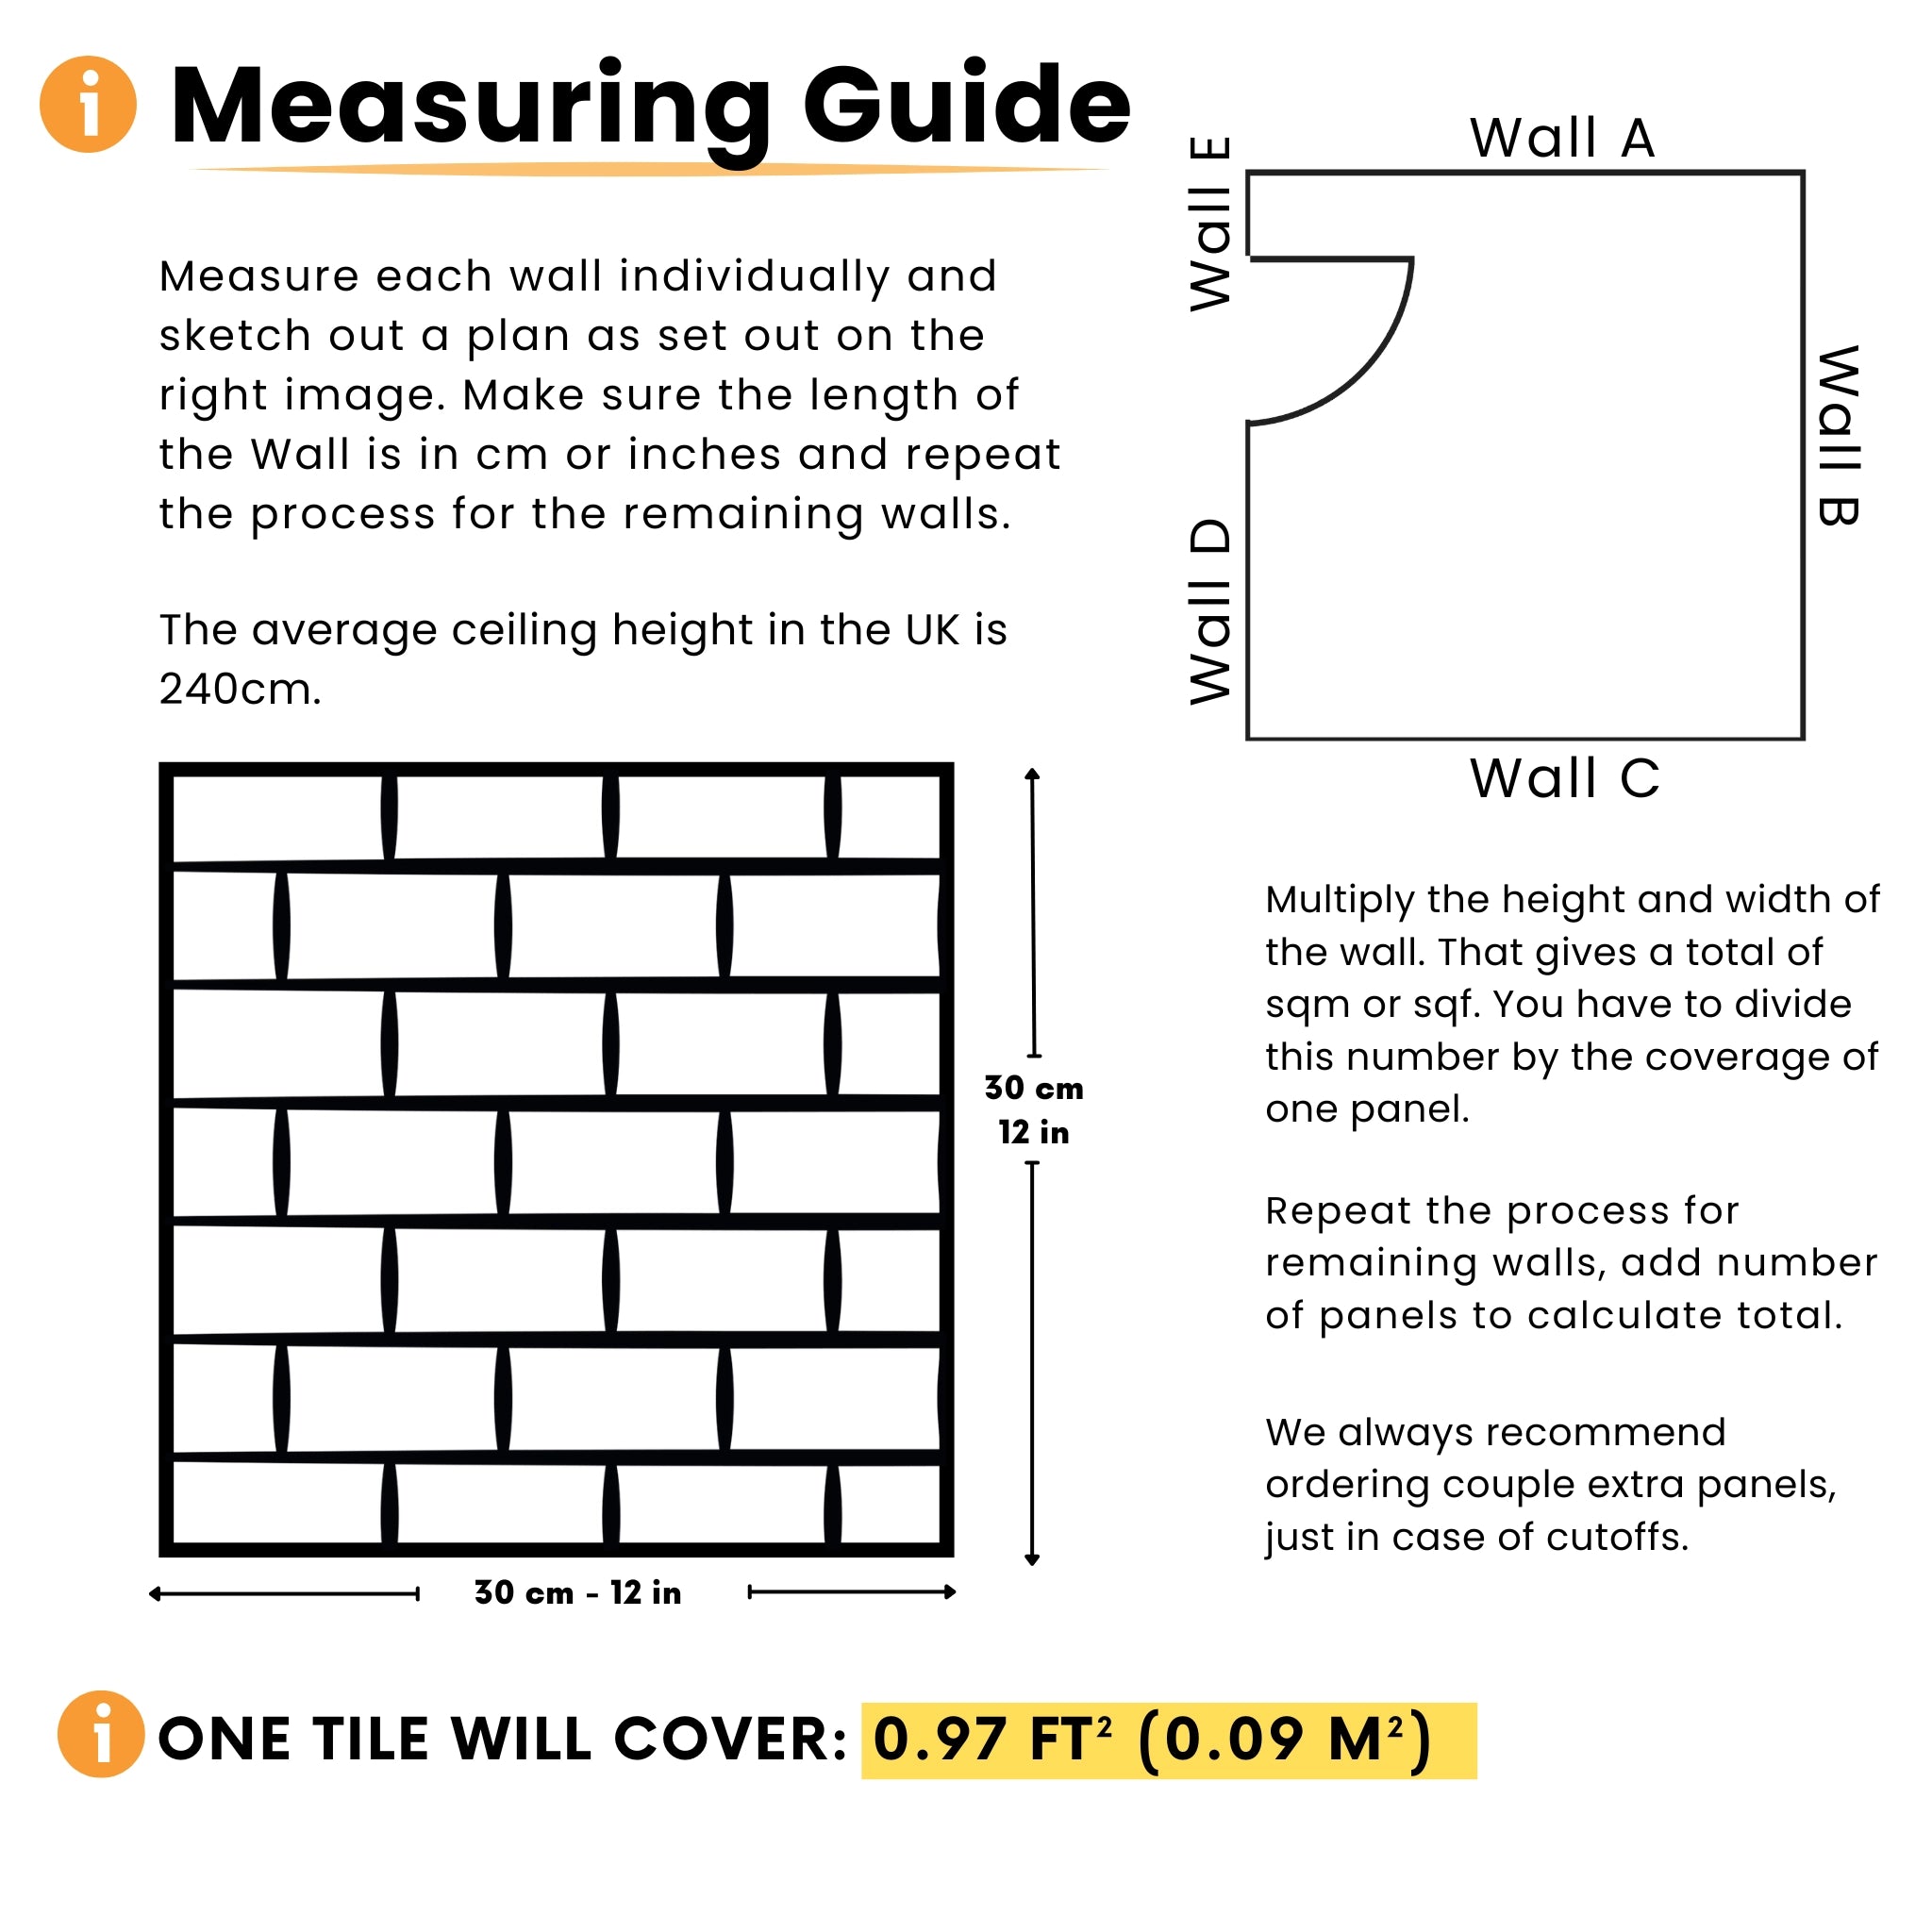 Measuring guide for wall panels, covering 0.97 sq ft per tile